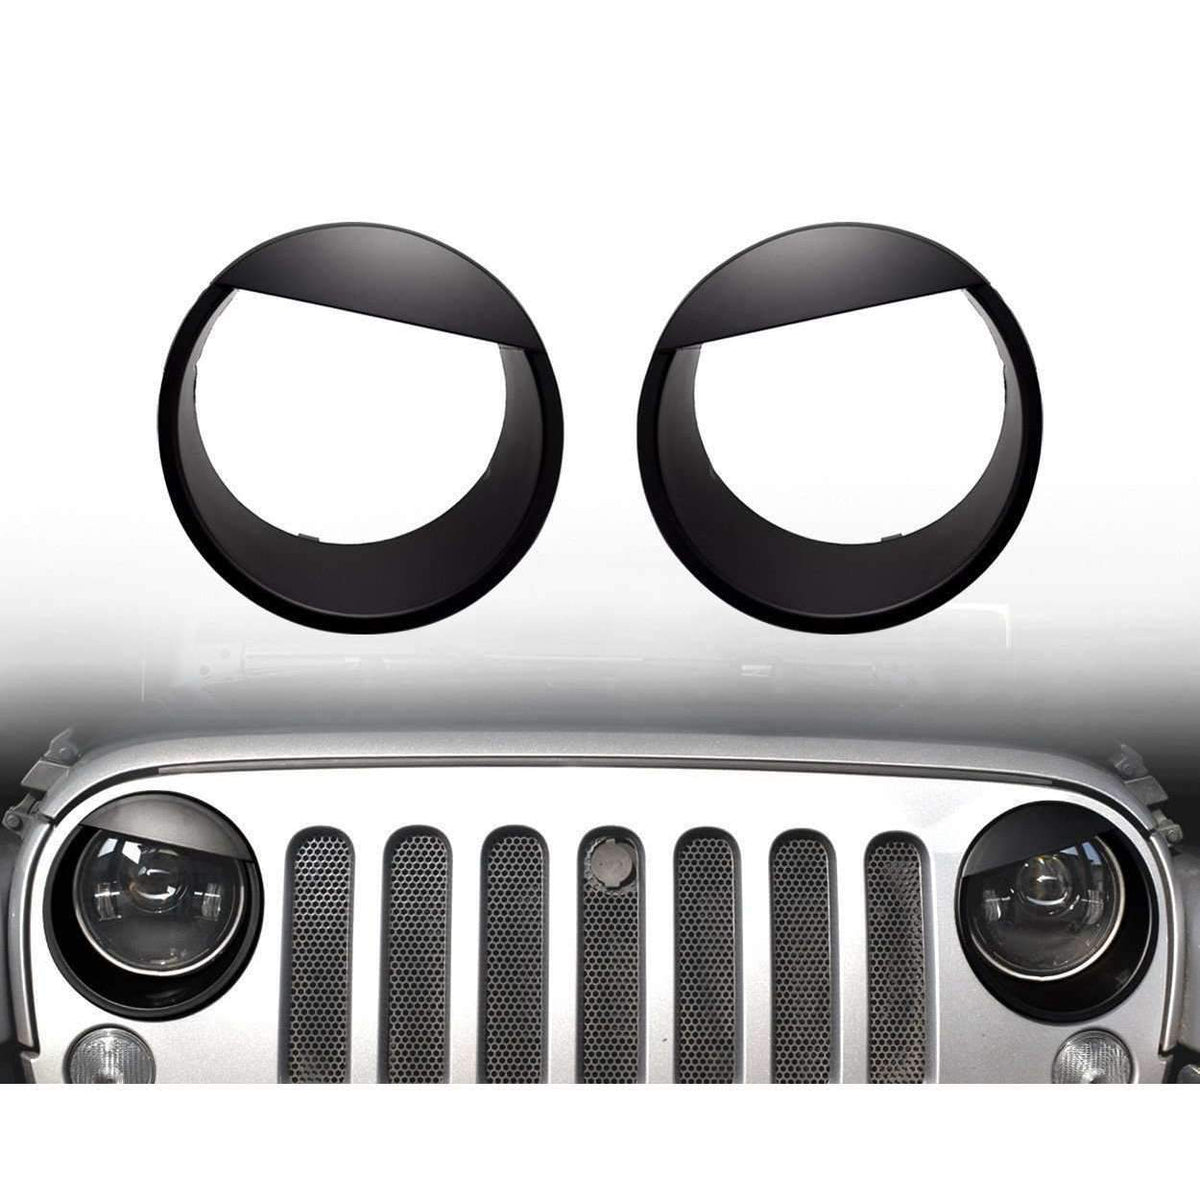 Jeep Accessories - Eagle Lights Jeep Wrangler Angry Eyes Headlight Rings